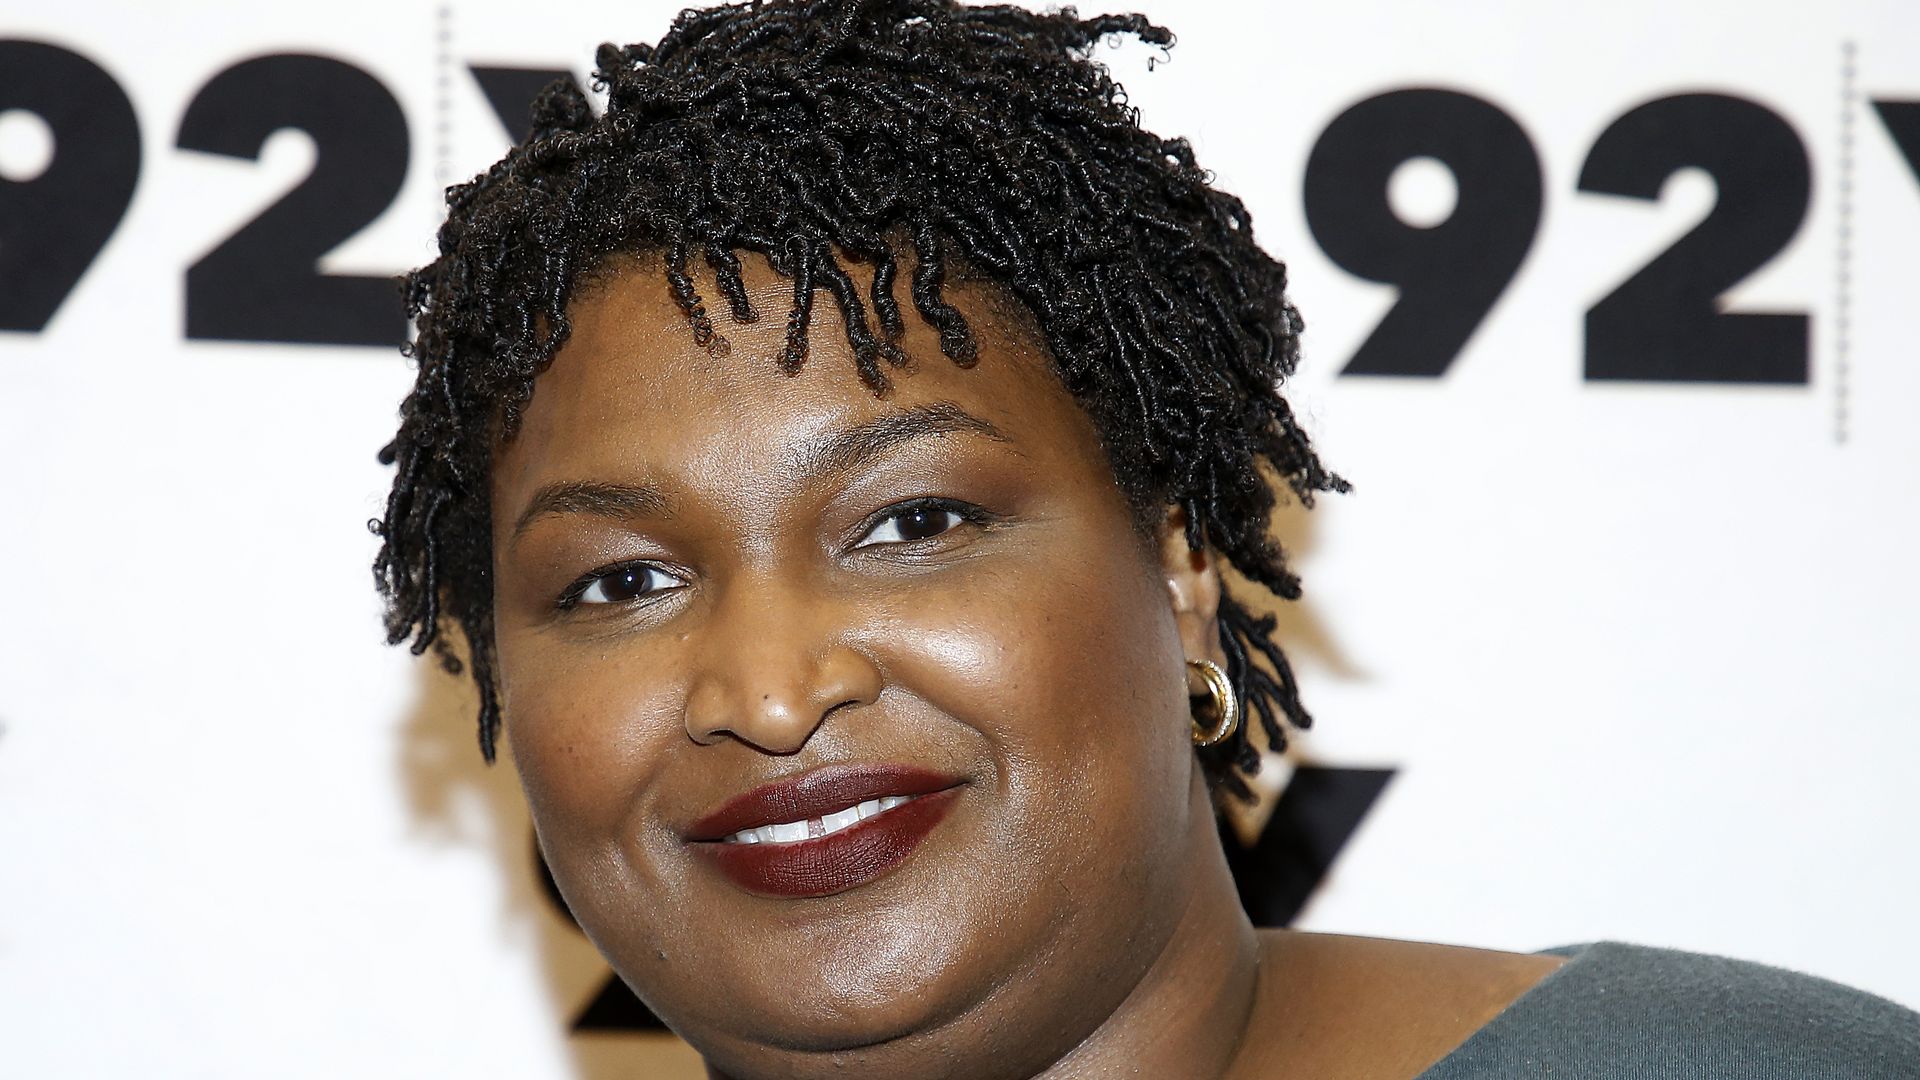 In this image, Stacey Abrams smiles at a camera.